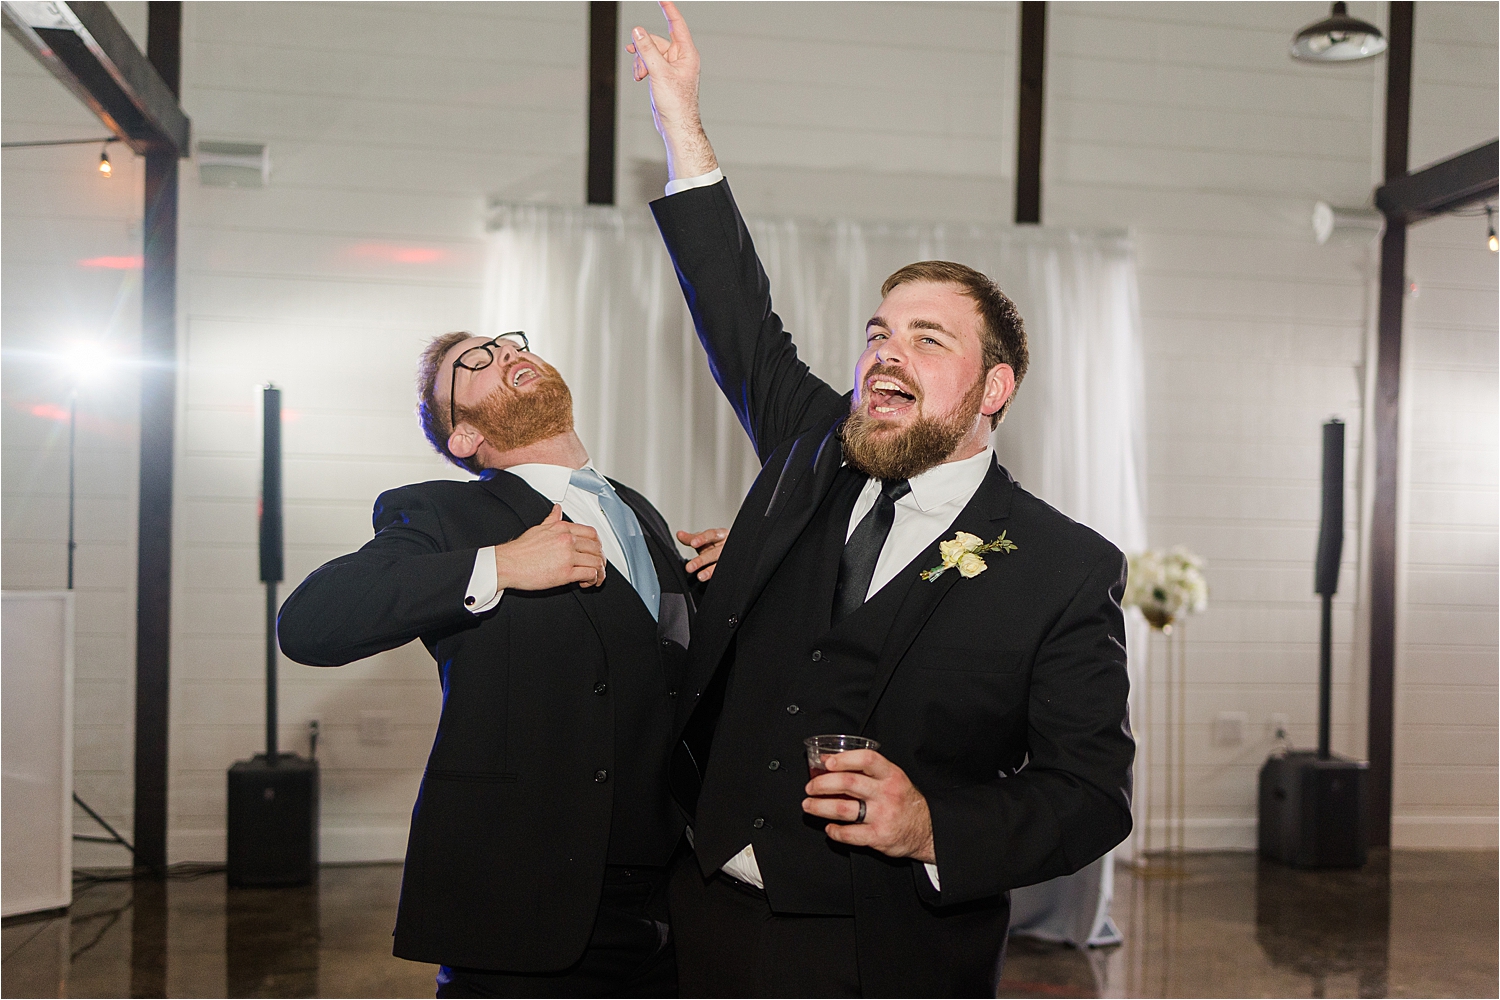 The groom and his groomsman dancing inside the wedding reception at Dream Point Ranch.